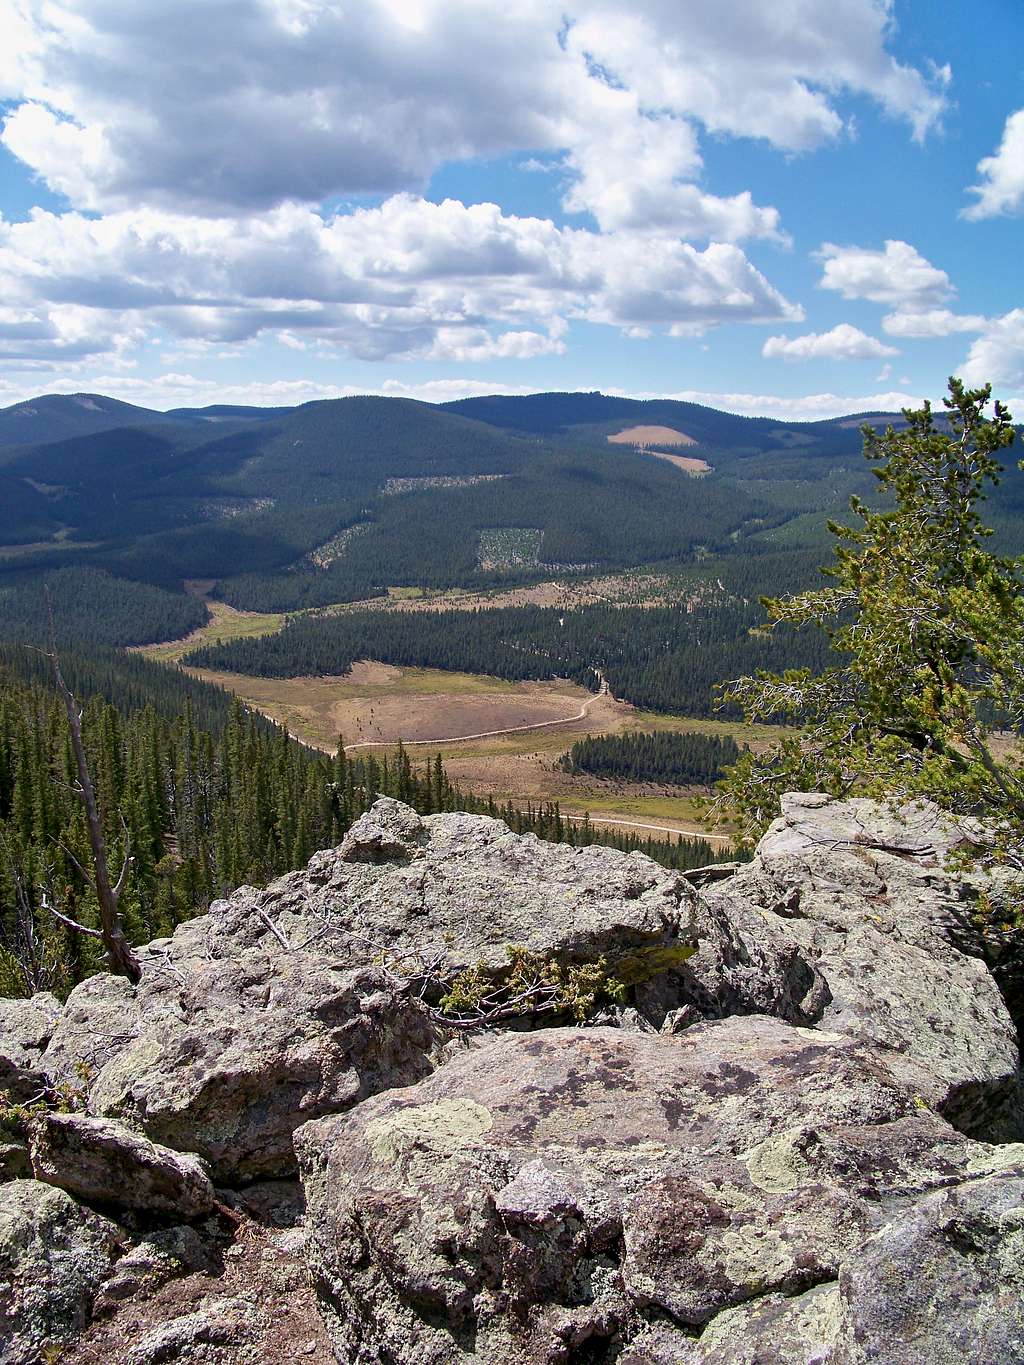 South from the summit